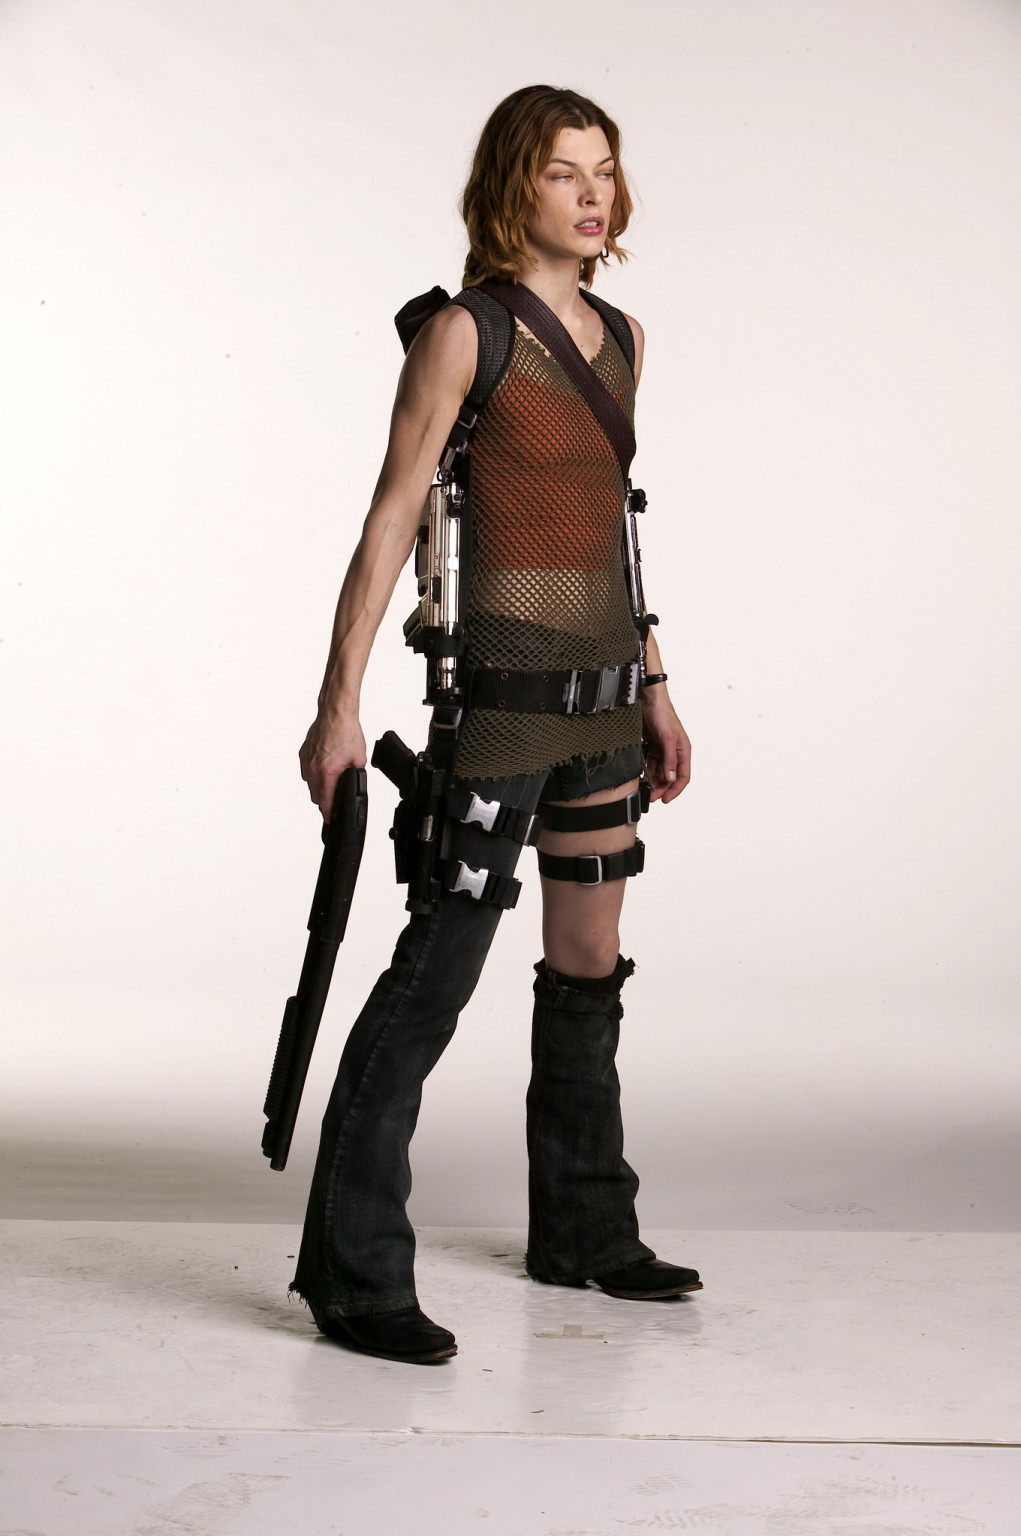 Milla Jovovich looking hot  armed to the teeth in the 'Resident Evil: Apocalypse #75233277